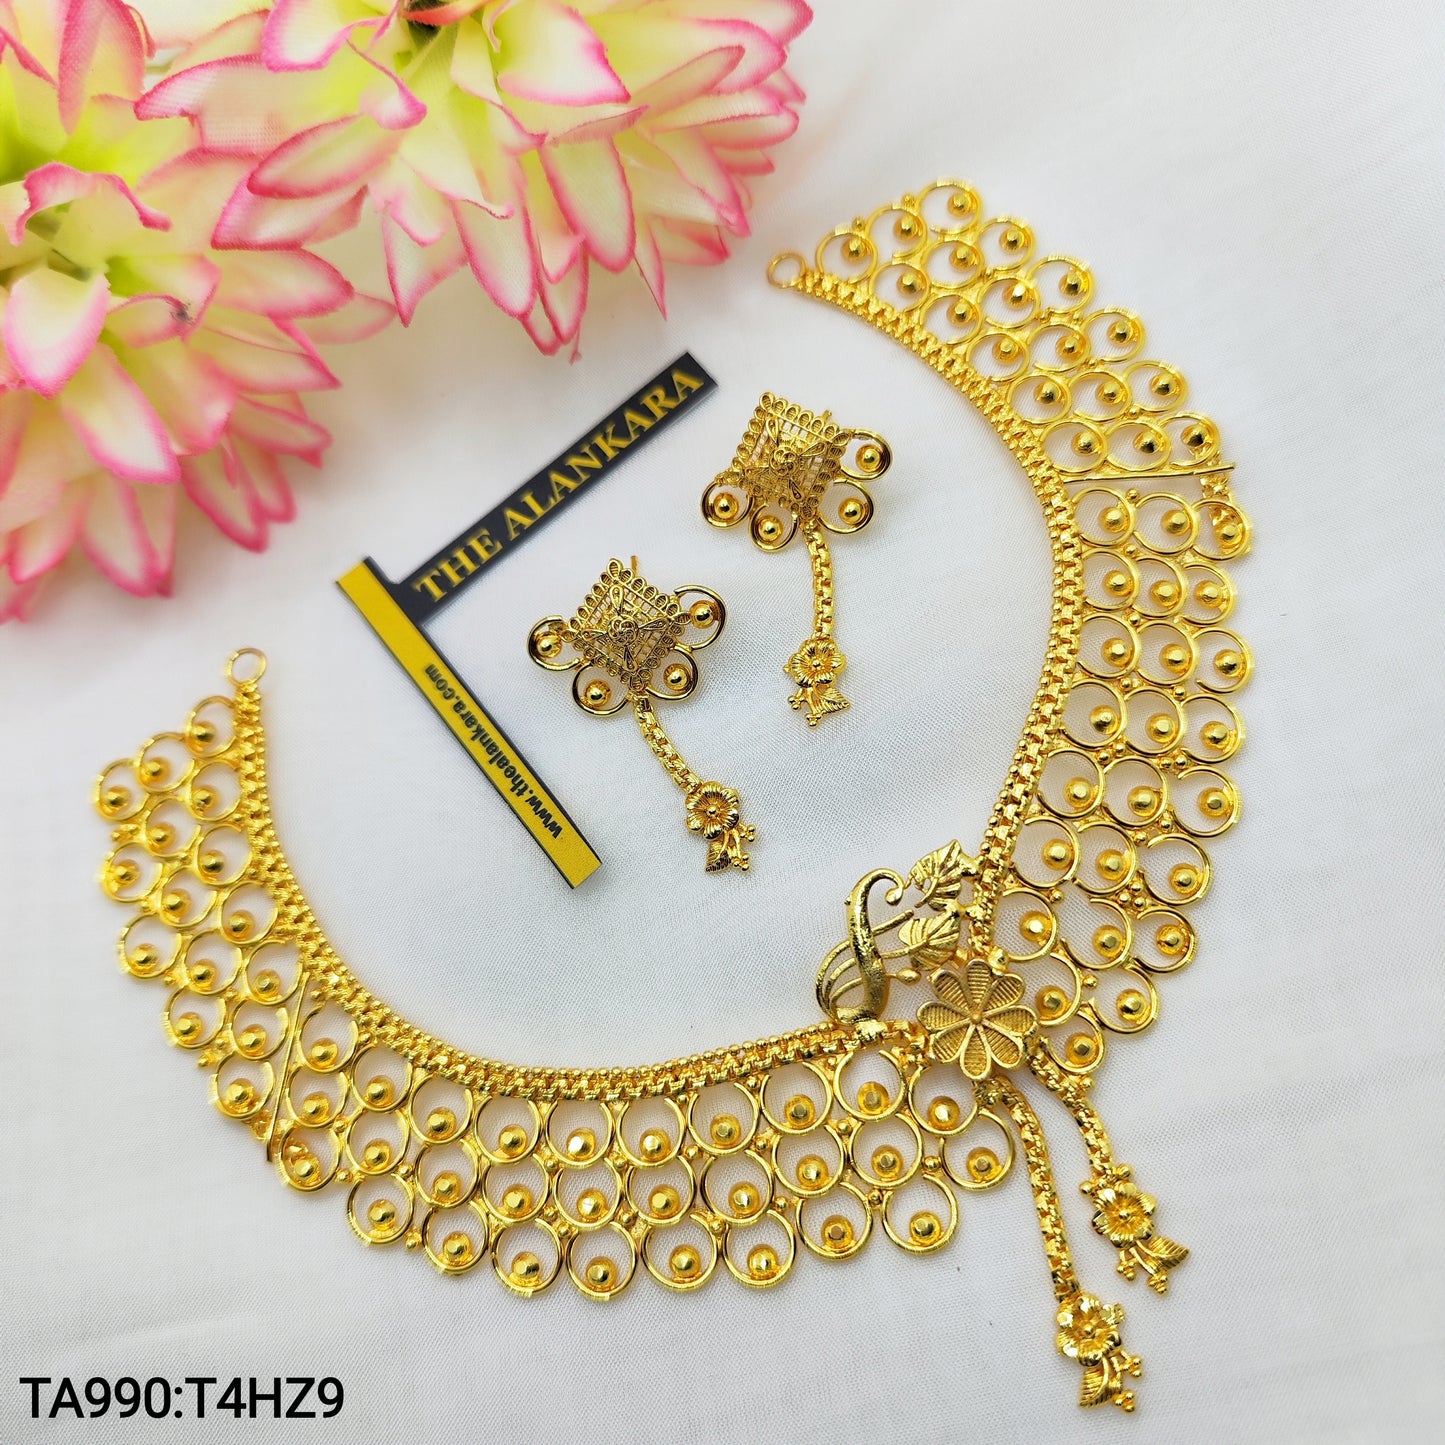 Scales designed Gold Plated Jewellery Set with Earrings